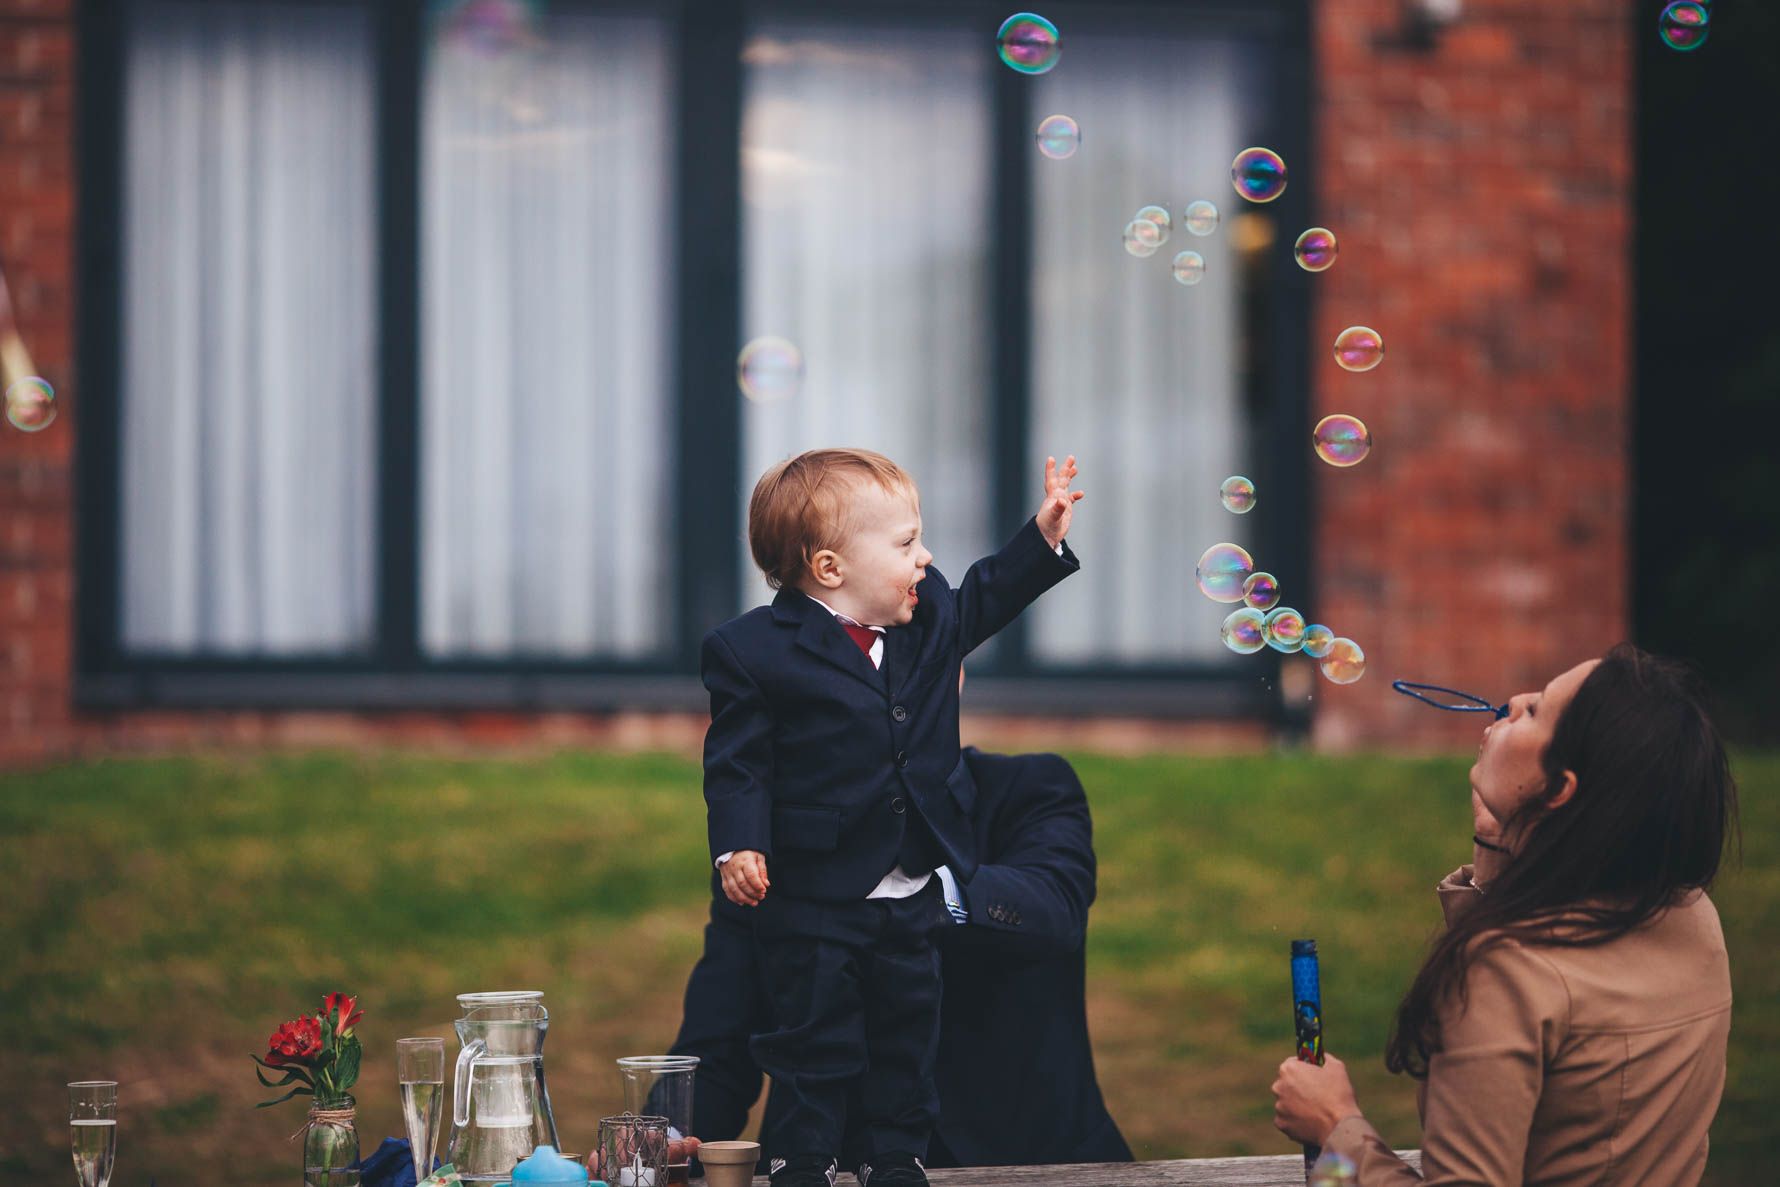 Young boy stood on a table trying to catch bubbles which a woman is blowing in front of him